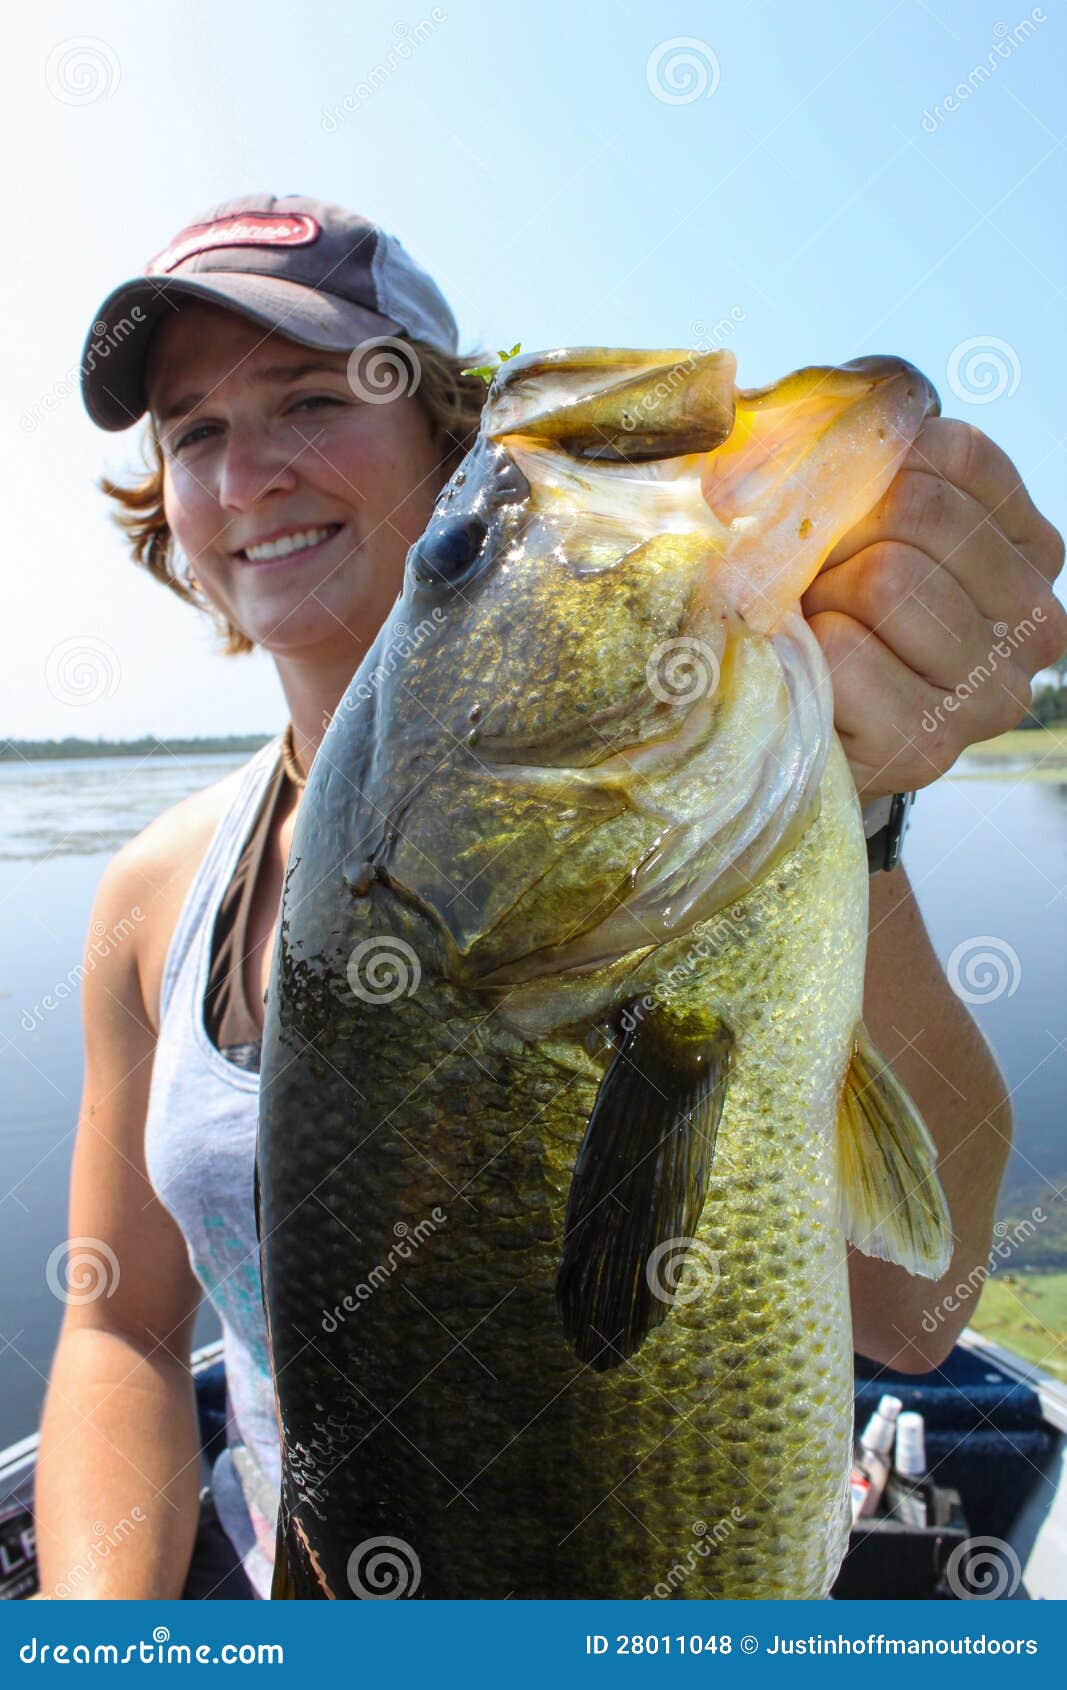 woman fishing large mouth bass attractive